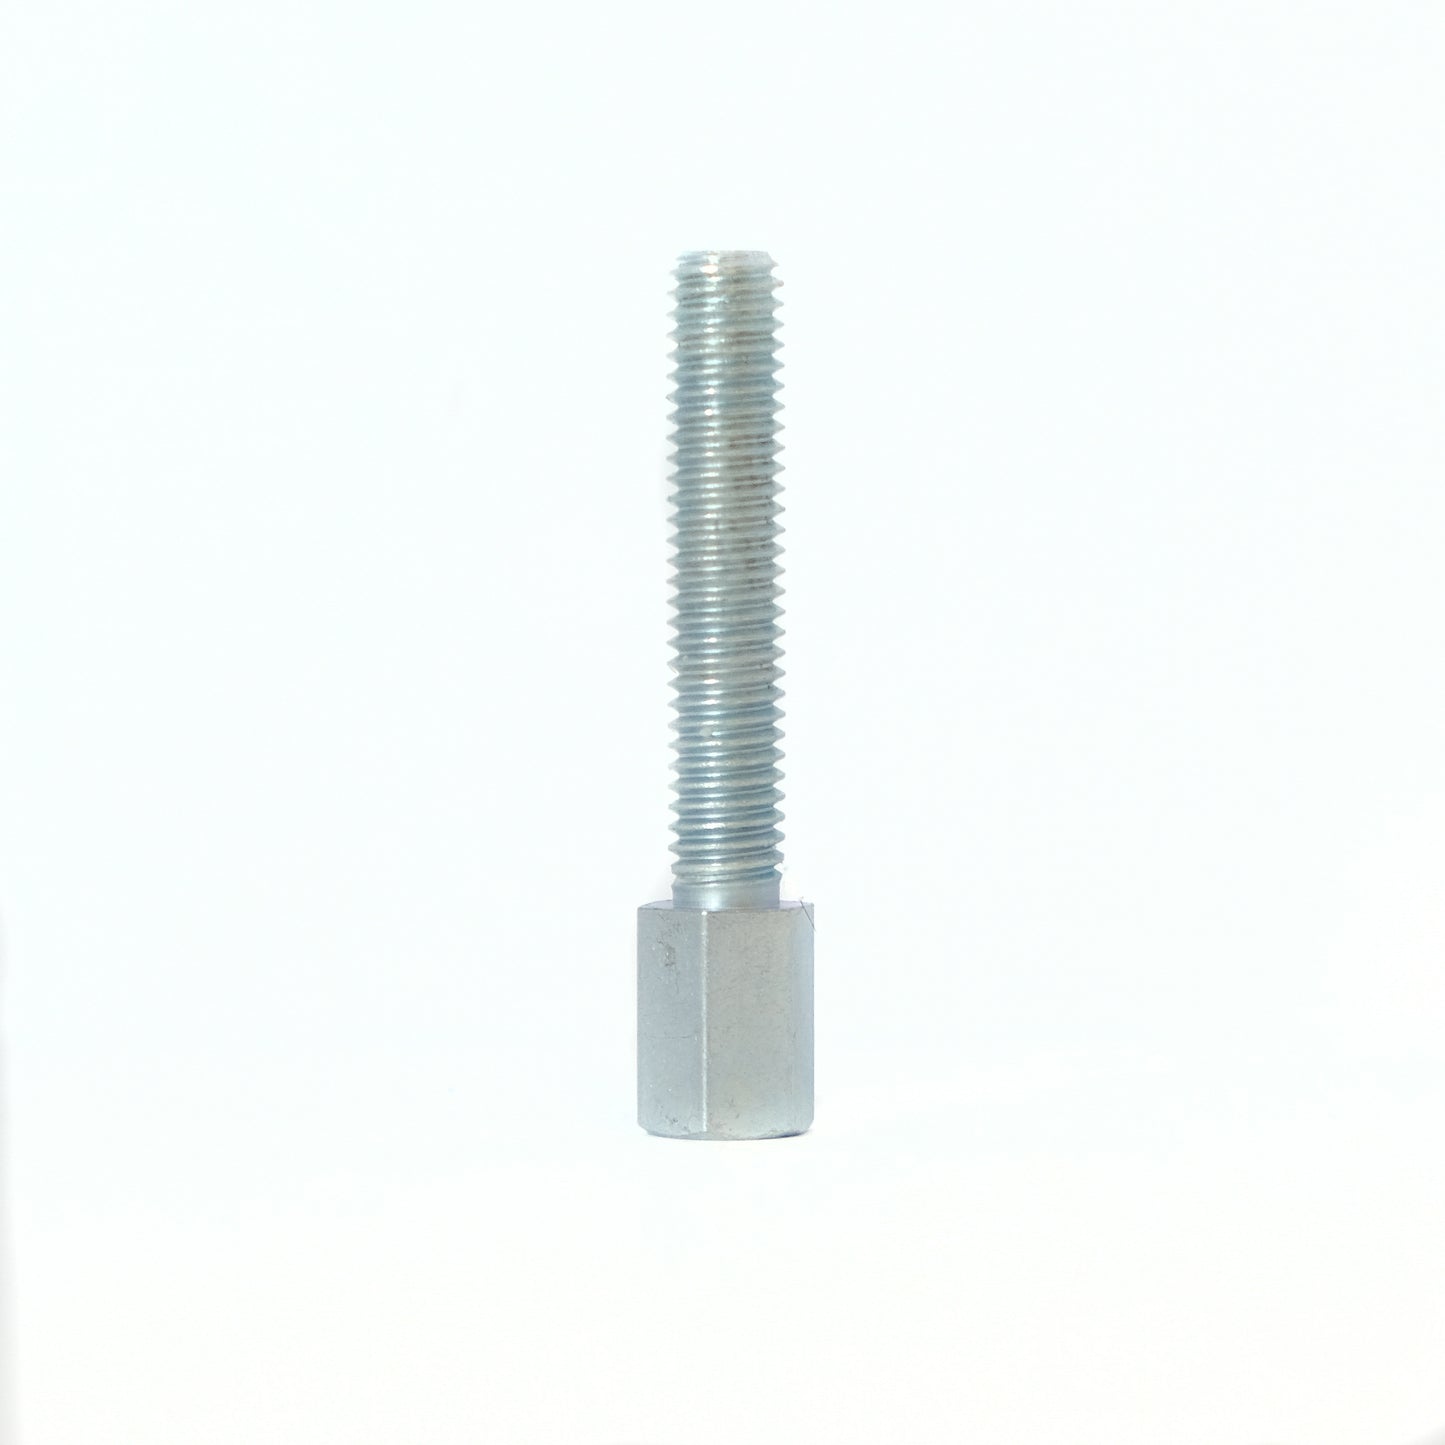 Universal M6 Throttle Cable Adjuster Screw 32mm